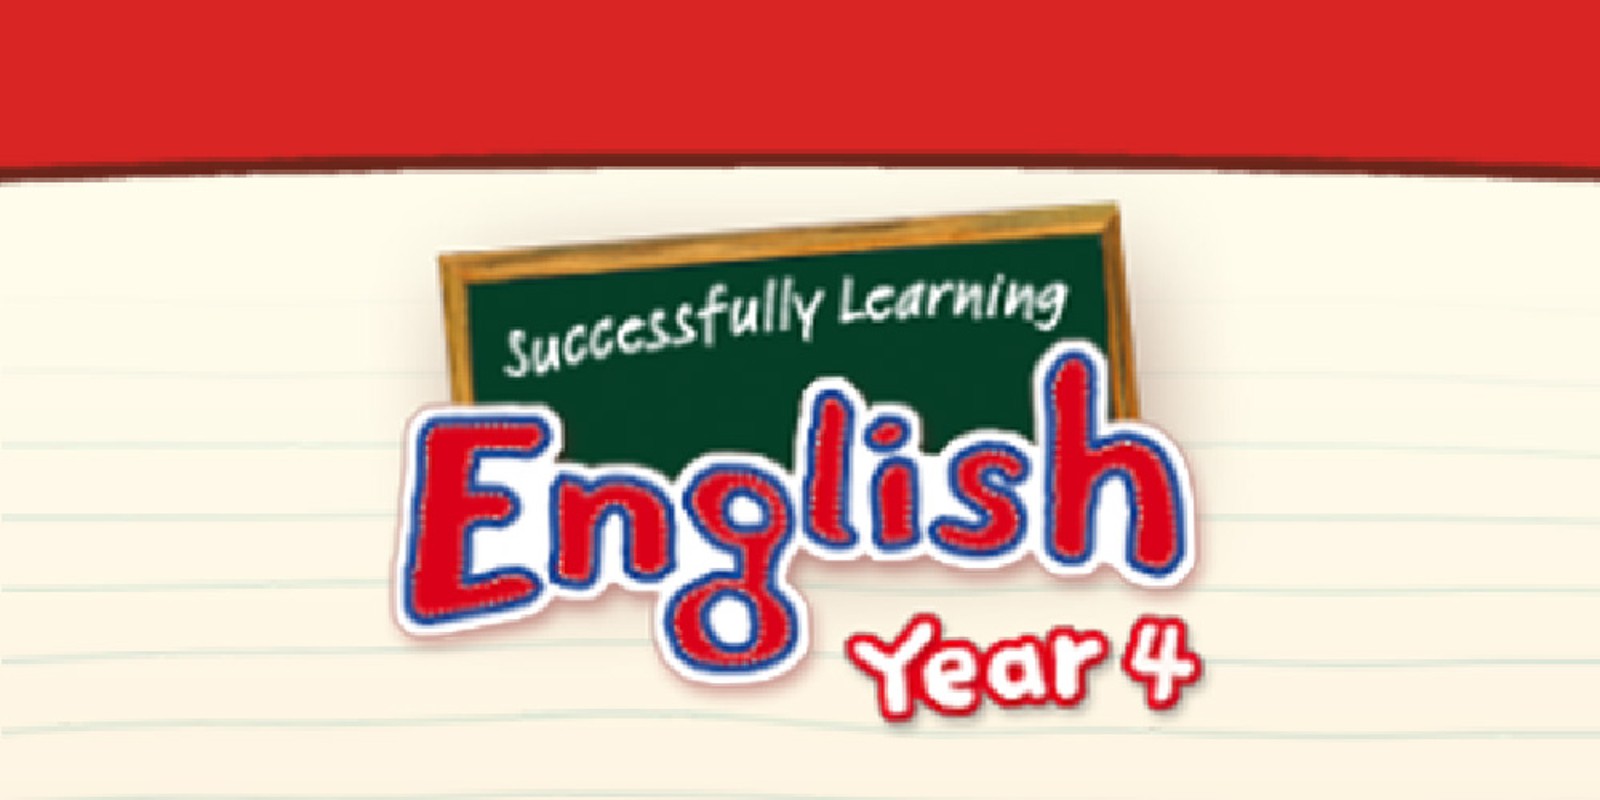 Successfully Learning English Year 4